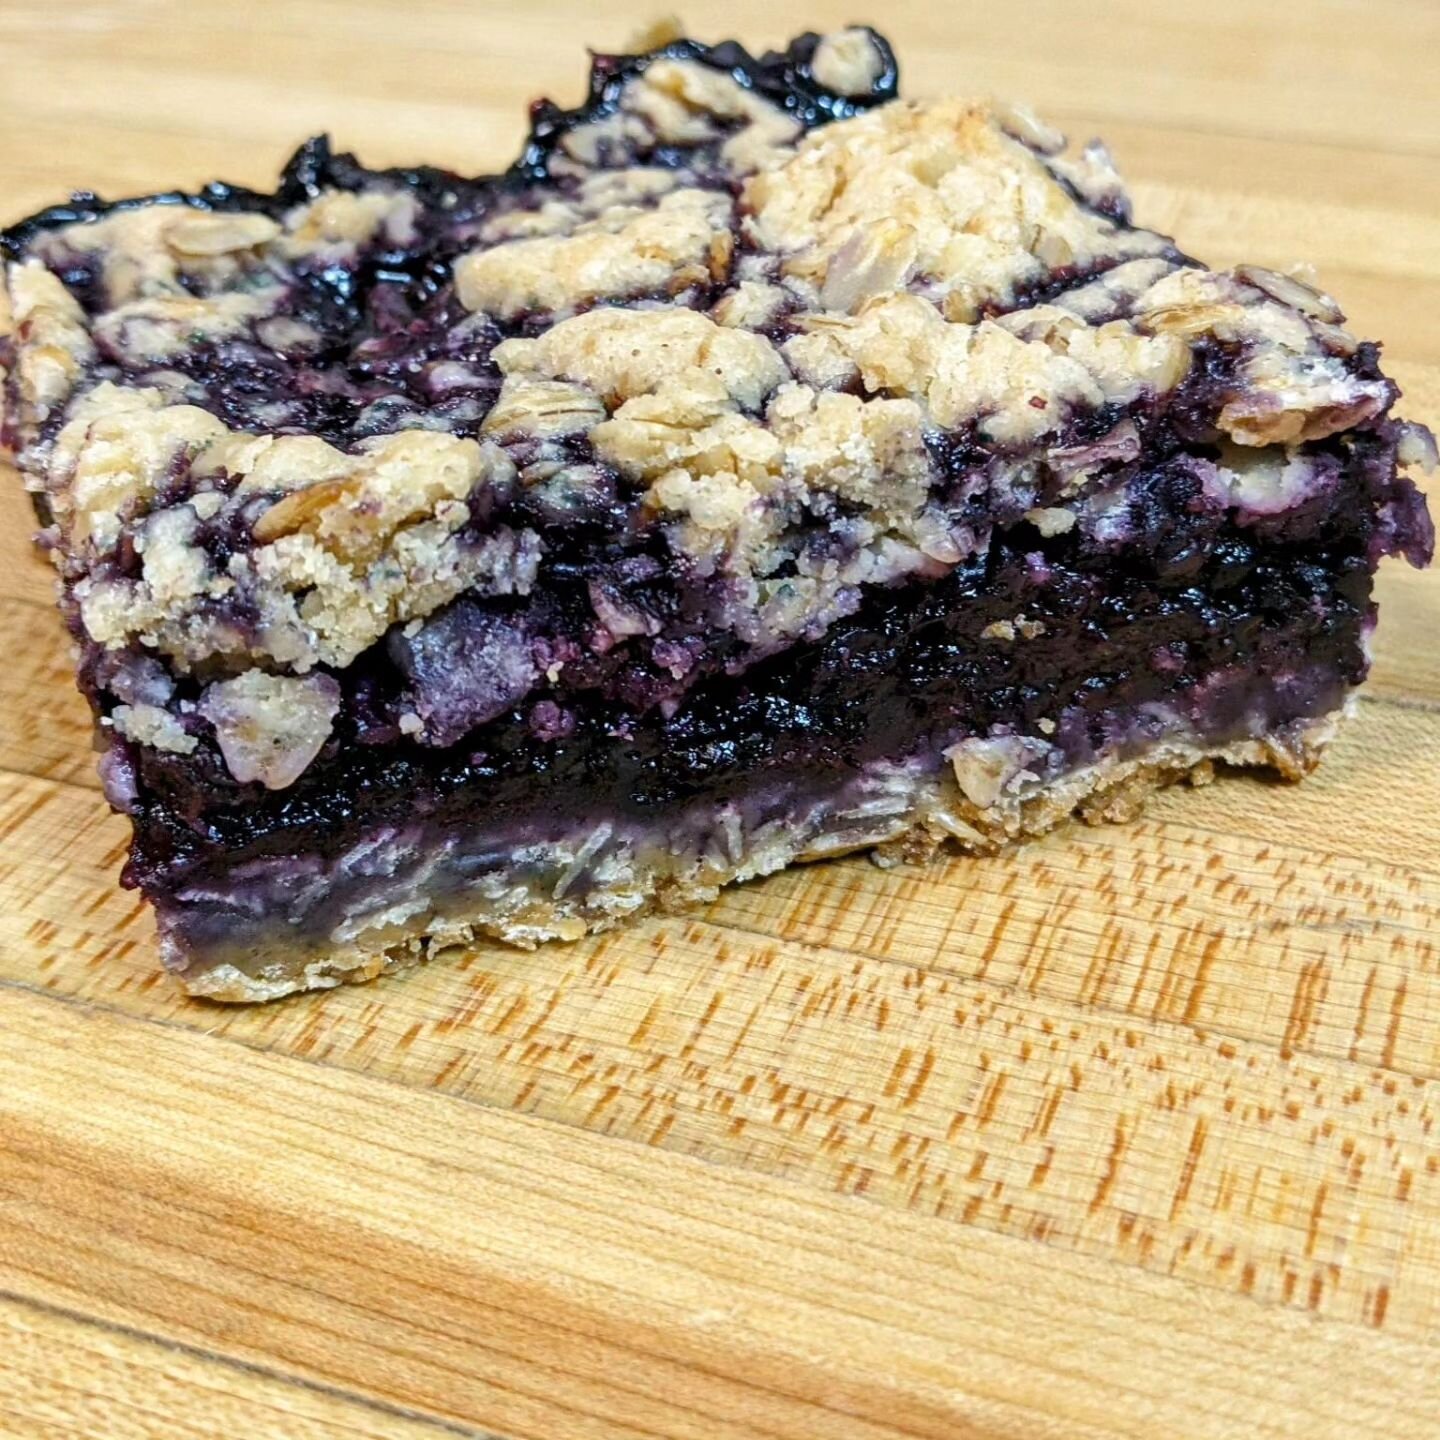 📸 Blueberry Pie Bar

Specials for Thursday, May 18th:

Lunch: House Roast Beef, Provolone, Lettuce, Fire Roasted Red Pepper, Jalape&ntilde;o with a Pesto Mayo on a Hard Roll $11.99

Drink: Fresh Squeezed Lemonade $4.49/$6.49

Half &amp; Half (1/2 Fr